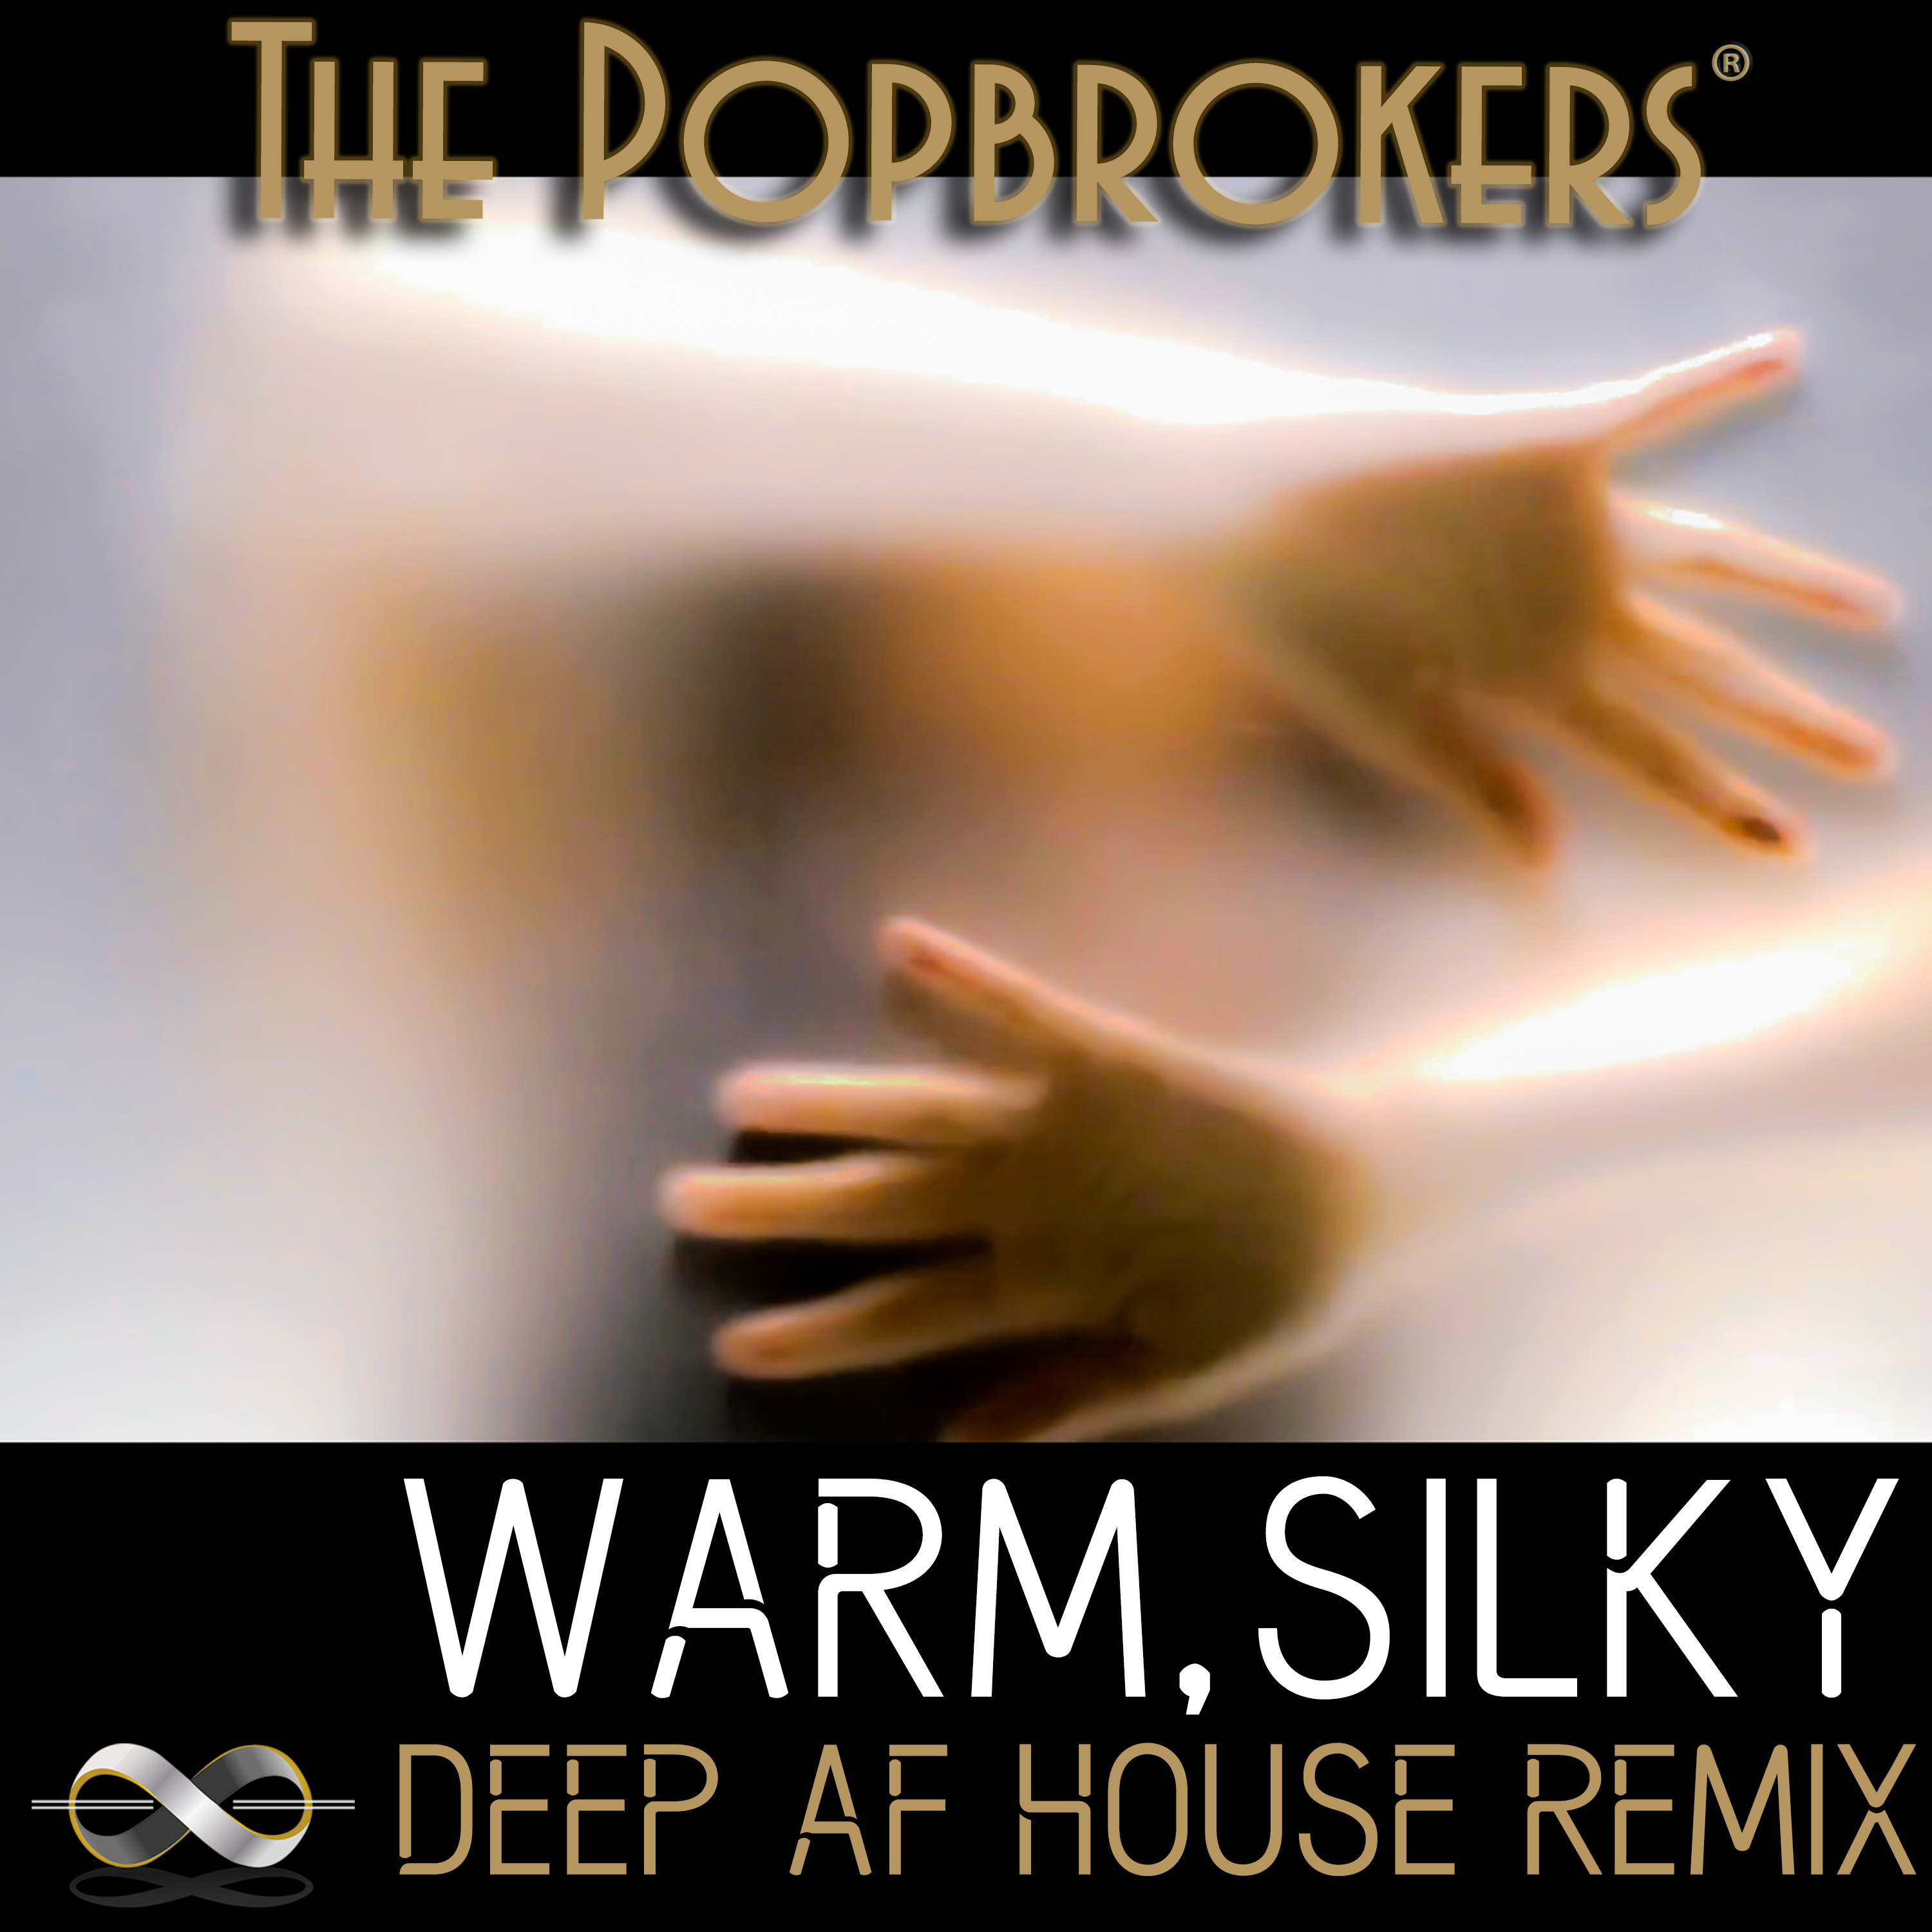 The PopBrokers - Warm, Silky (Deep AF House Remix) (2020)